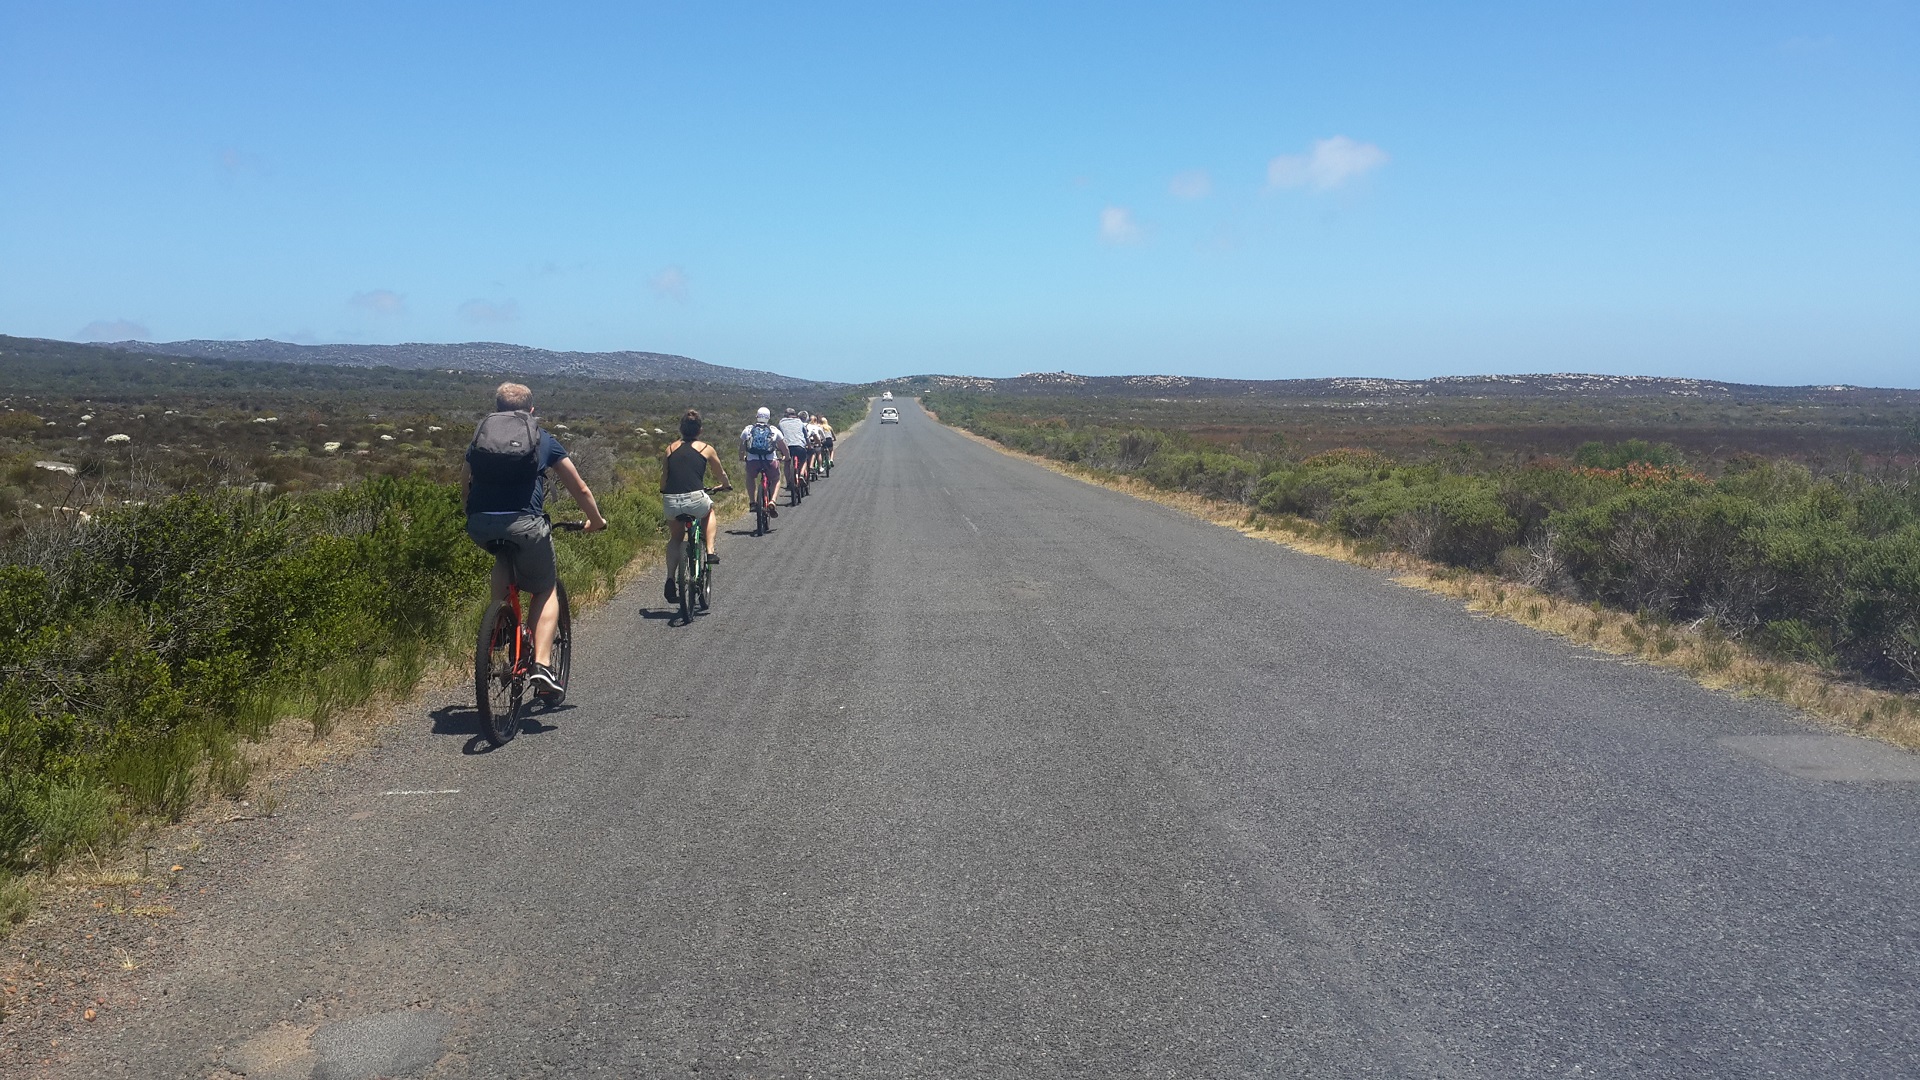 During our tour in Cape Peninsula we had an opportunity make part of the trip by bike.